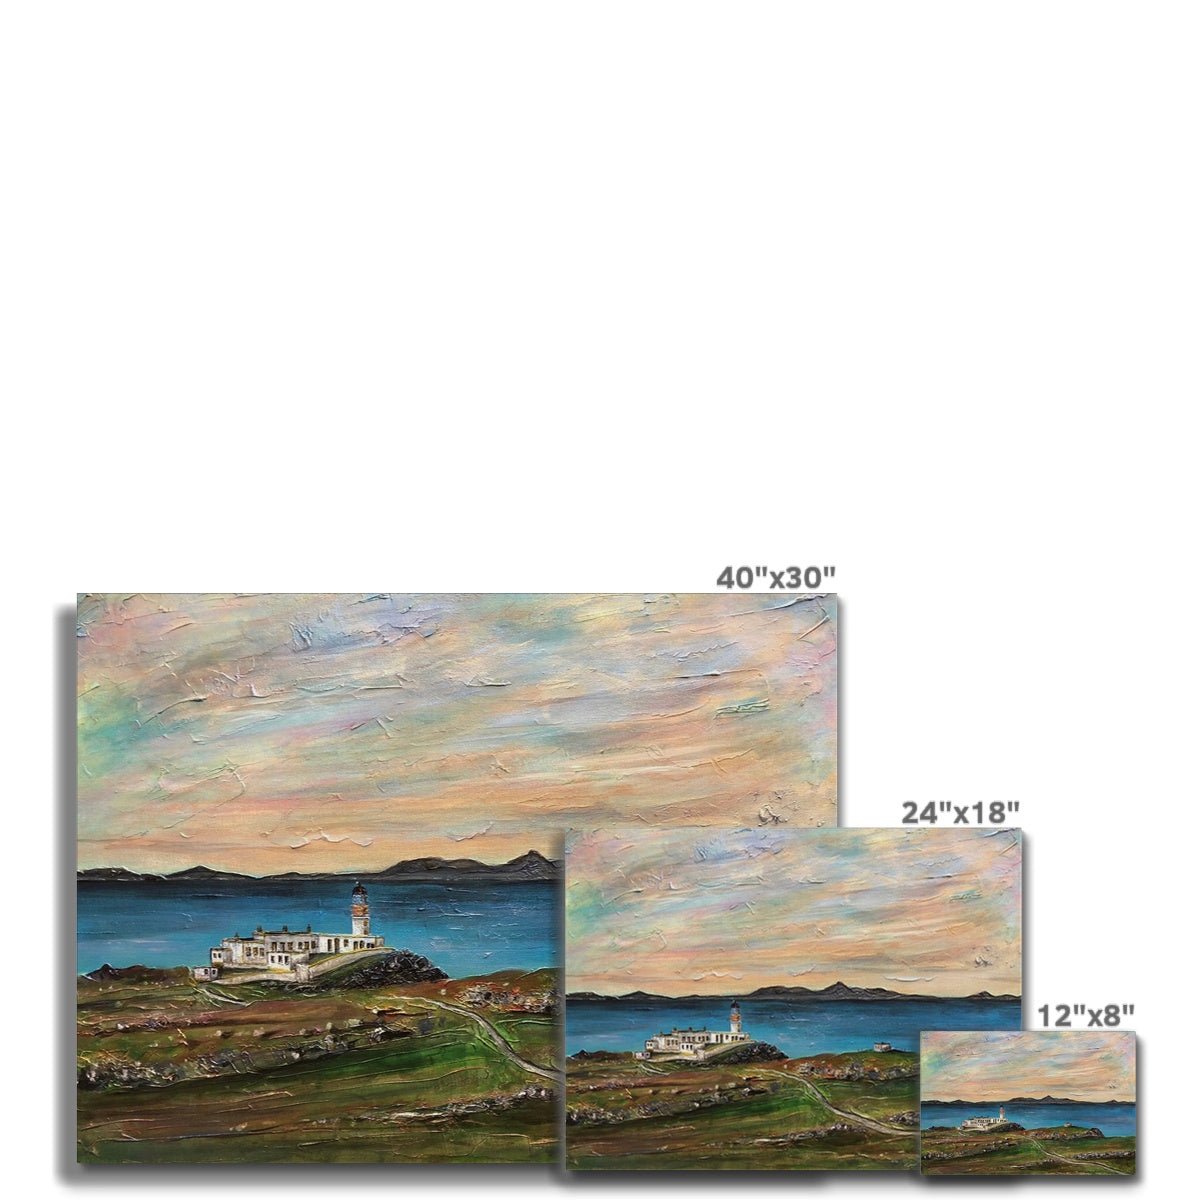 Neist Point Skye Painting | Canvas From Scotland-Contemporary Stretched Canvas Prints-Skye Art Gallery-Paintings, Prints, Homeware, Art Gifts From Scotland By Scottish Artist Kevin Hunter